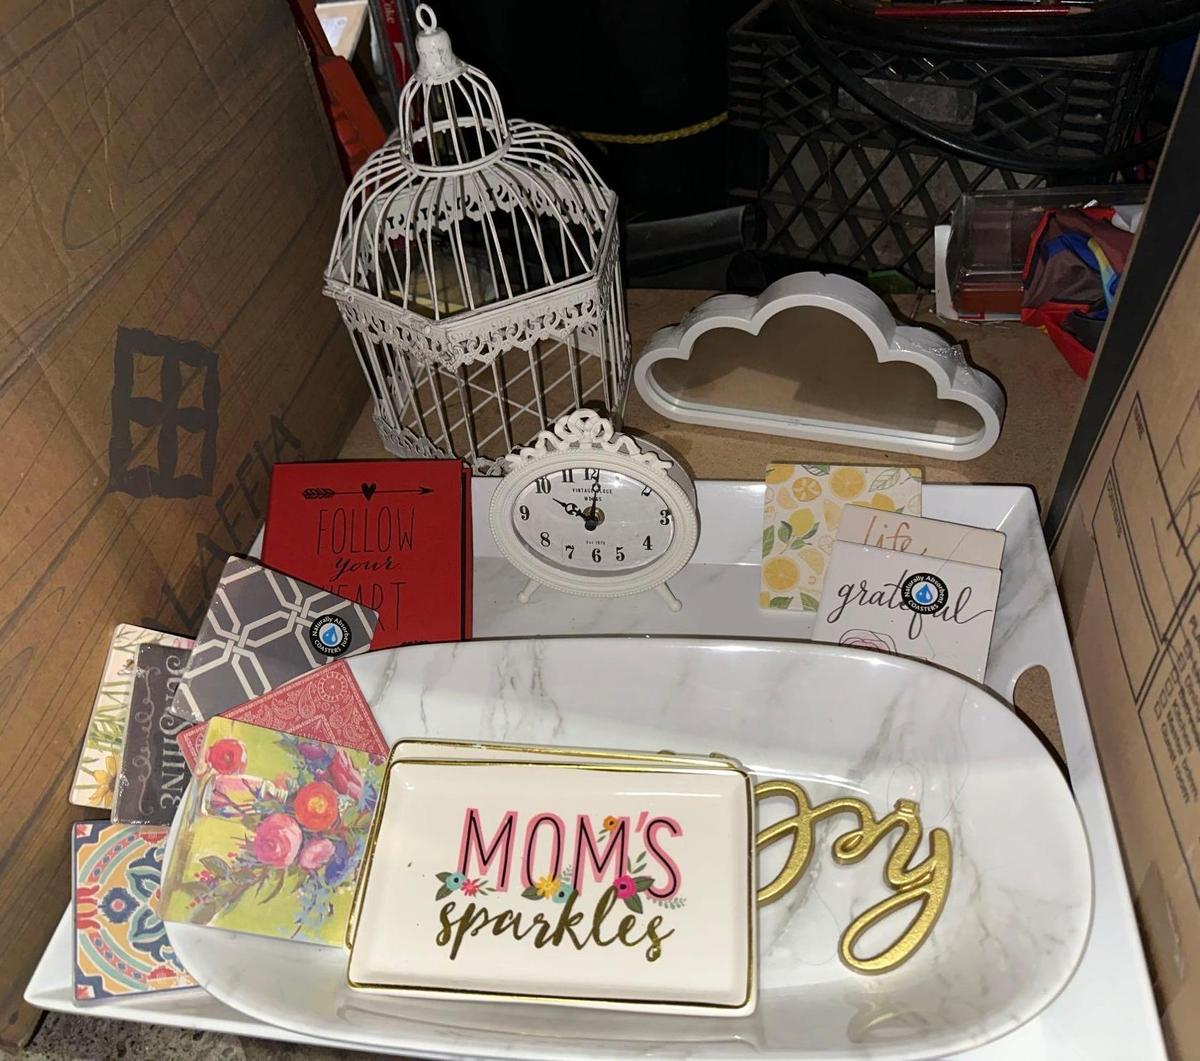 Home Decor Lot- Stone Platters, Cage, Clock, Coasters and more